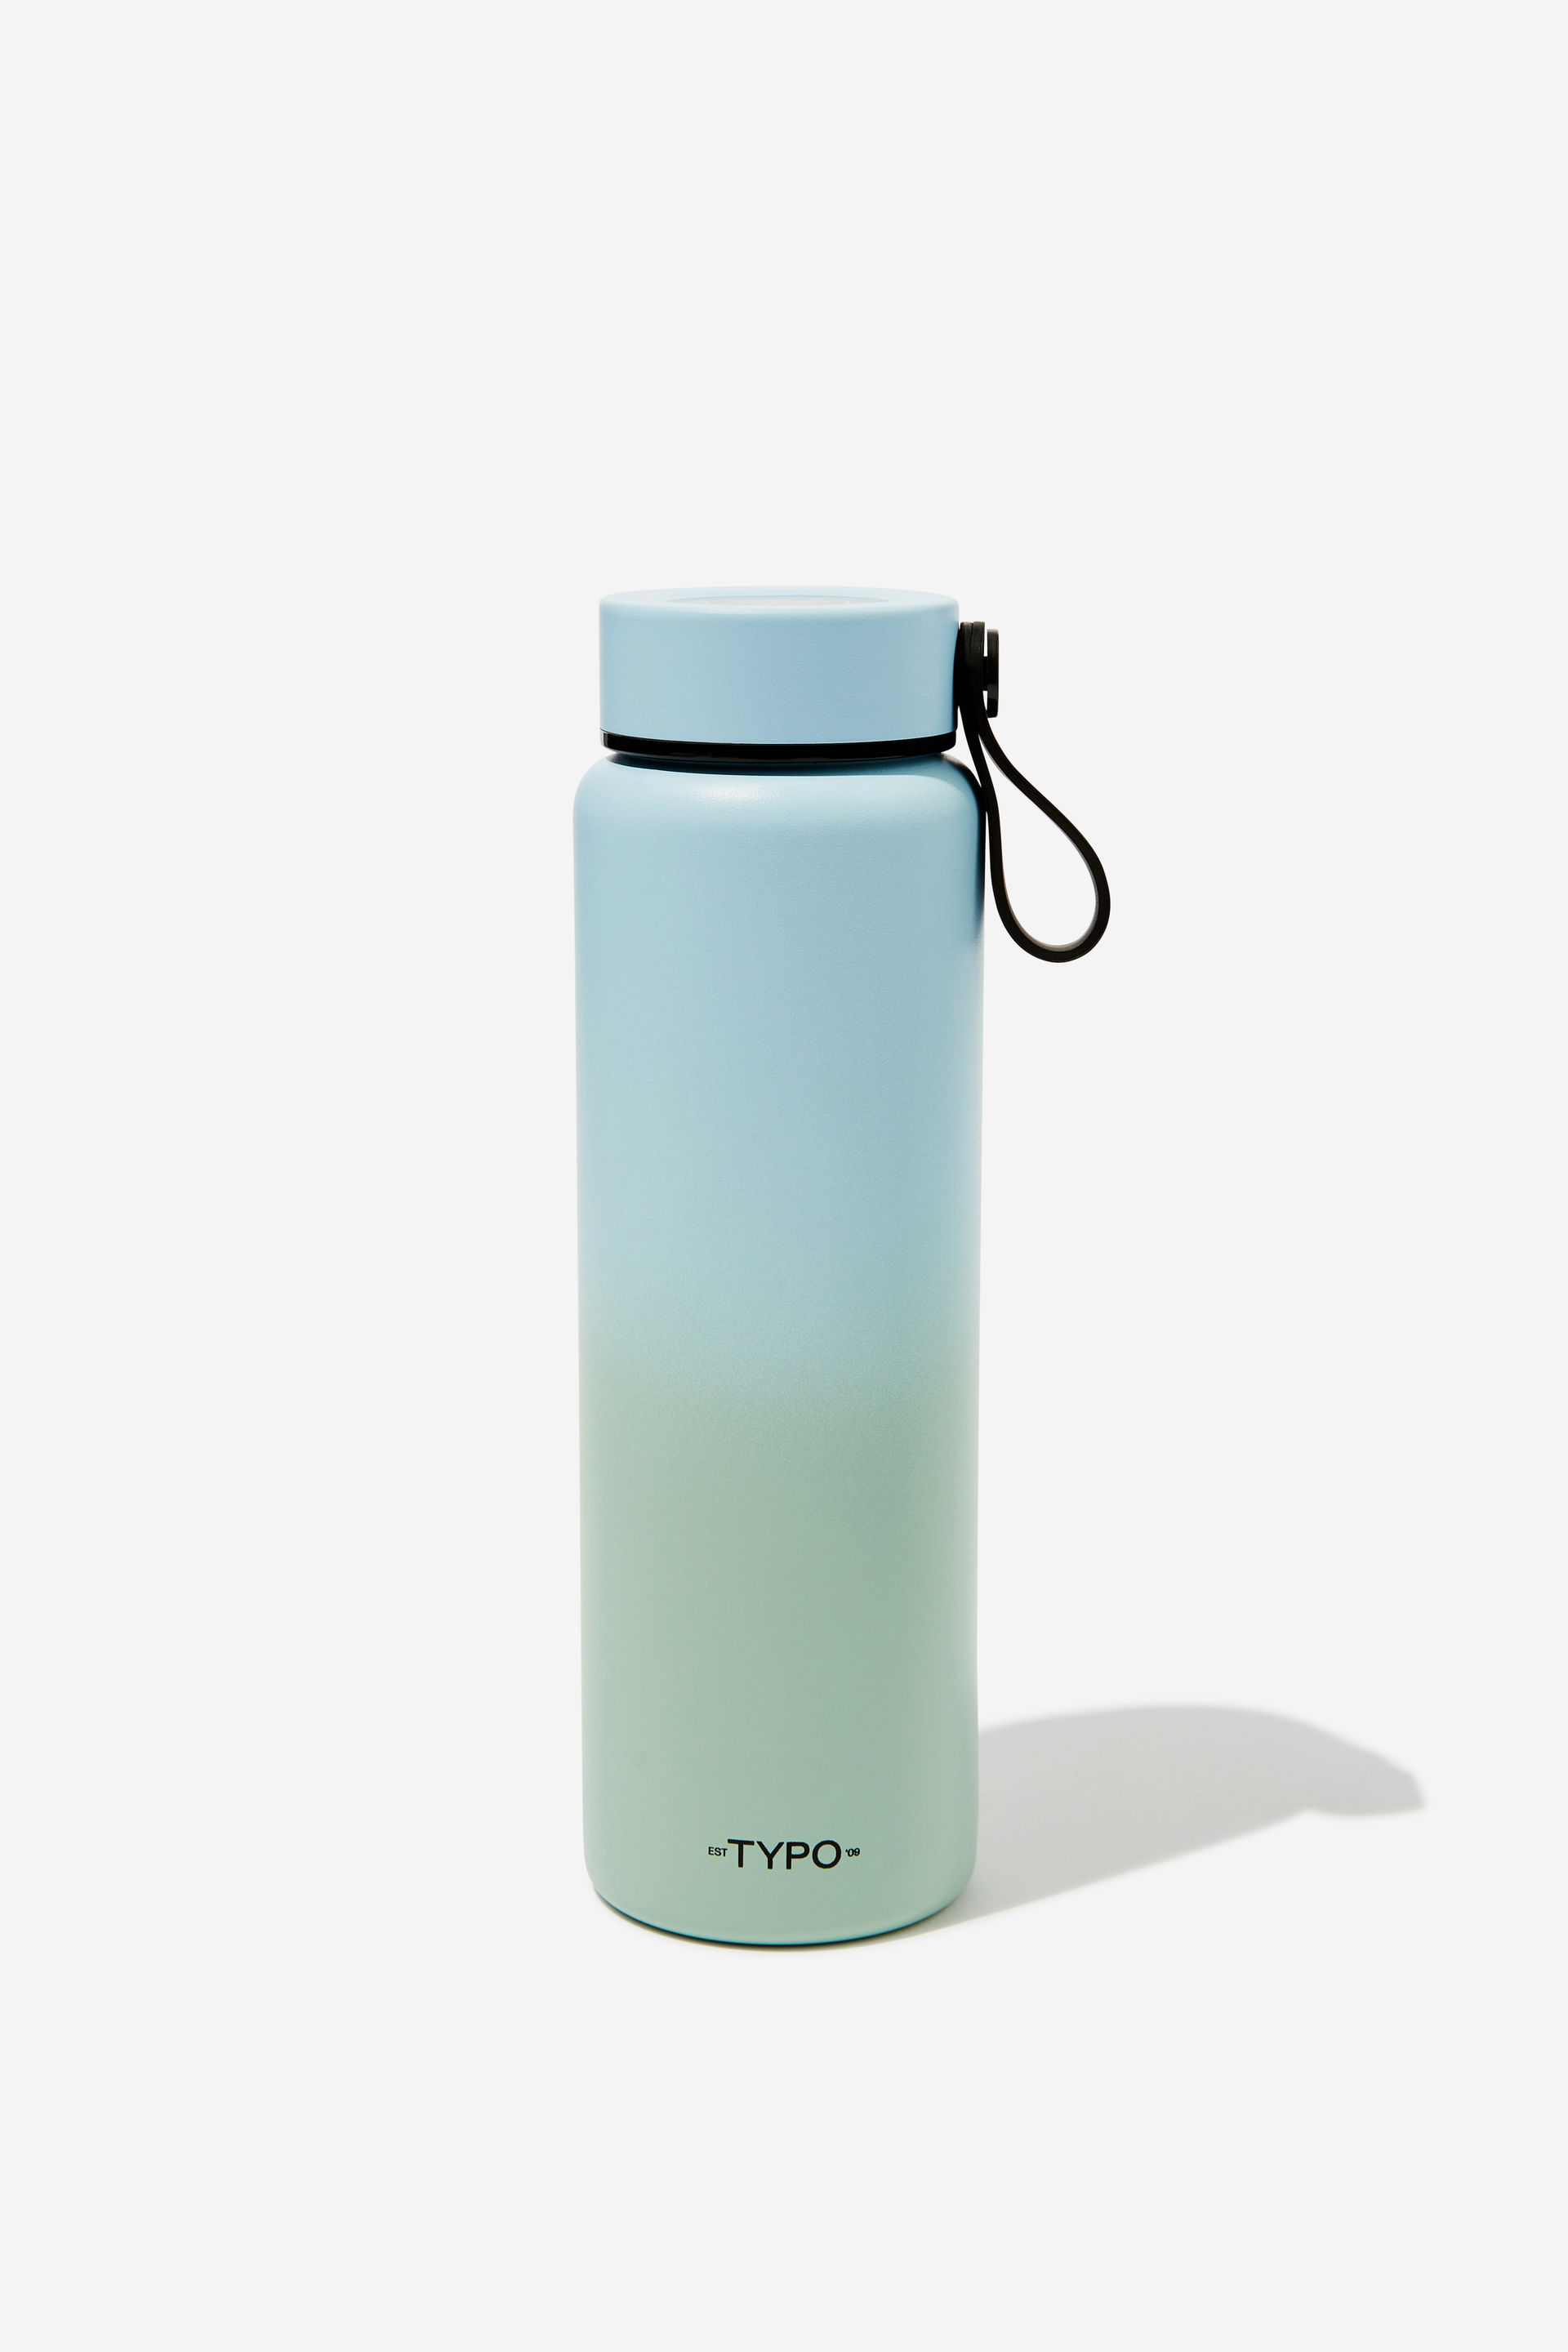 Typo - On The Move 500Ml Drink Bottle 2.0 - Arctic blue ombre